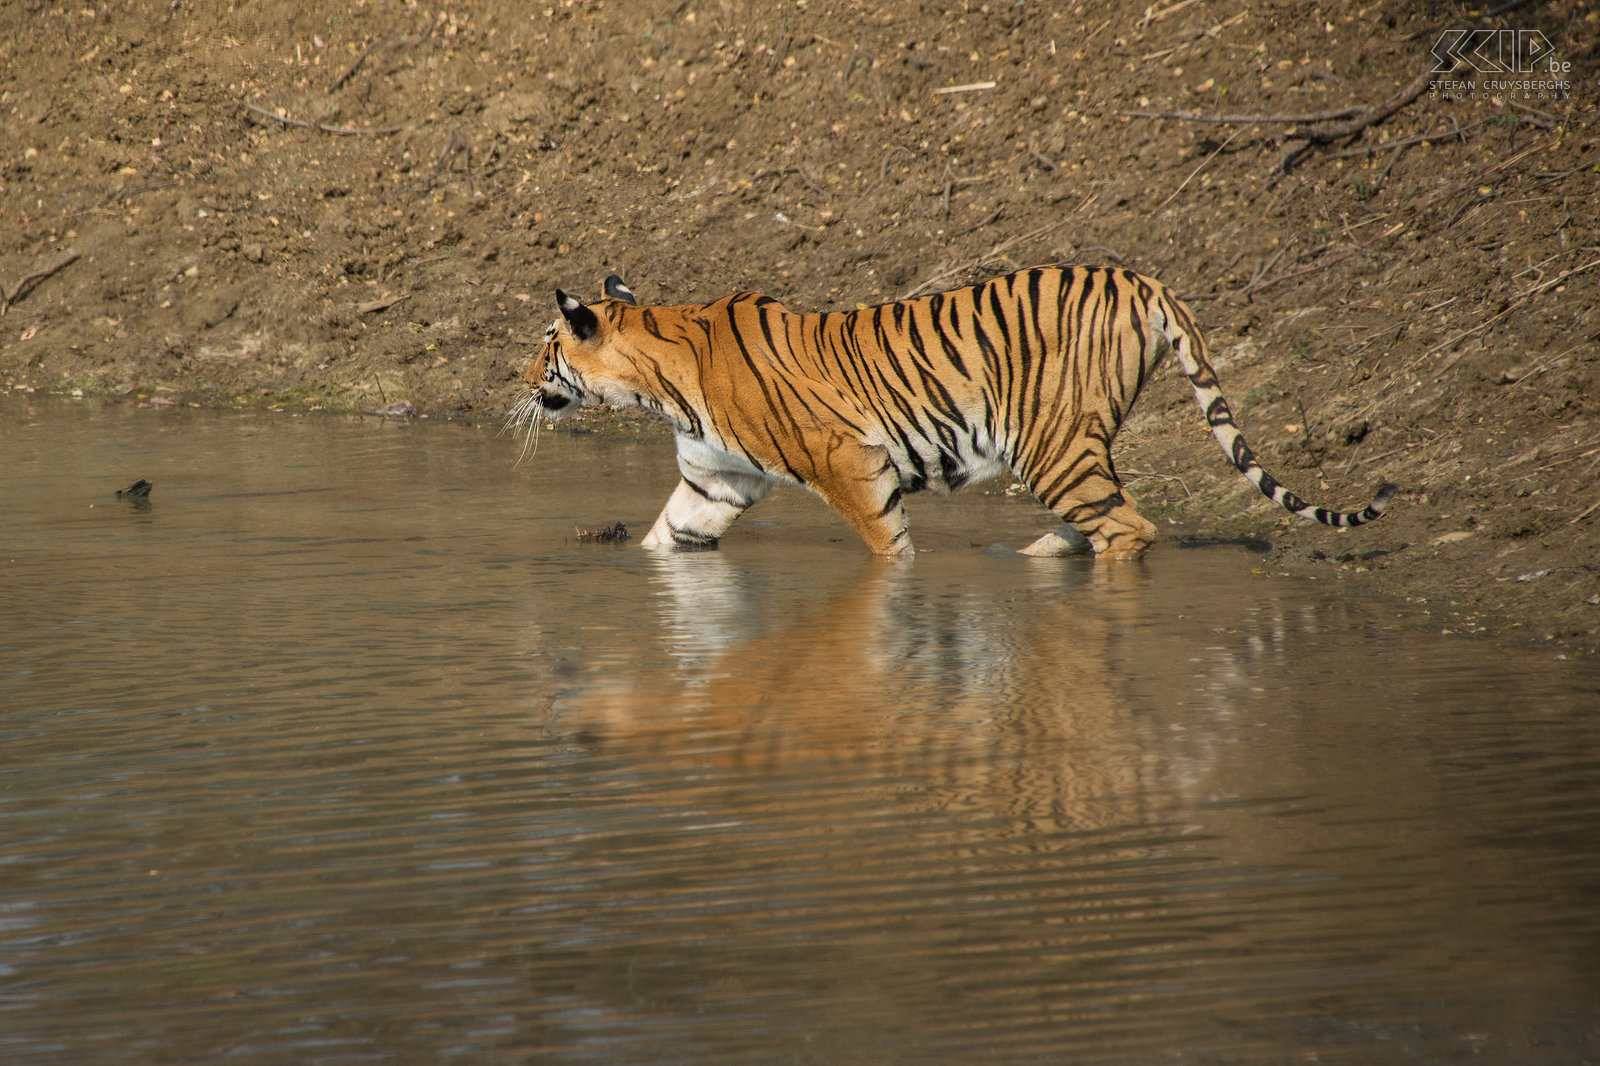 Tadoba - Tigress The tigress comes out of the high grass and sneaks into the water. Stefan Cruysberghs